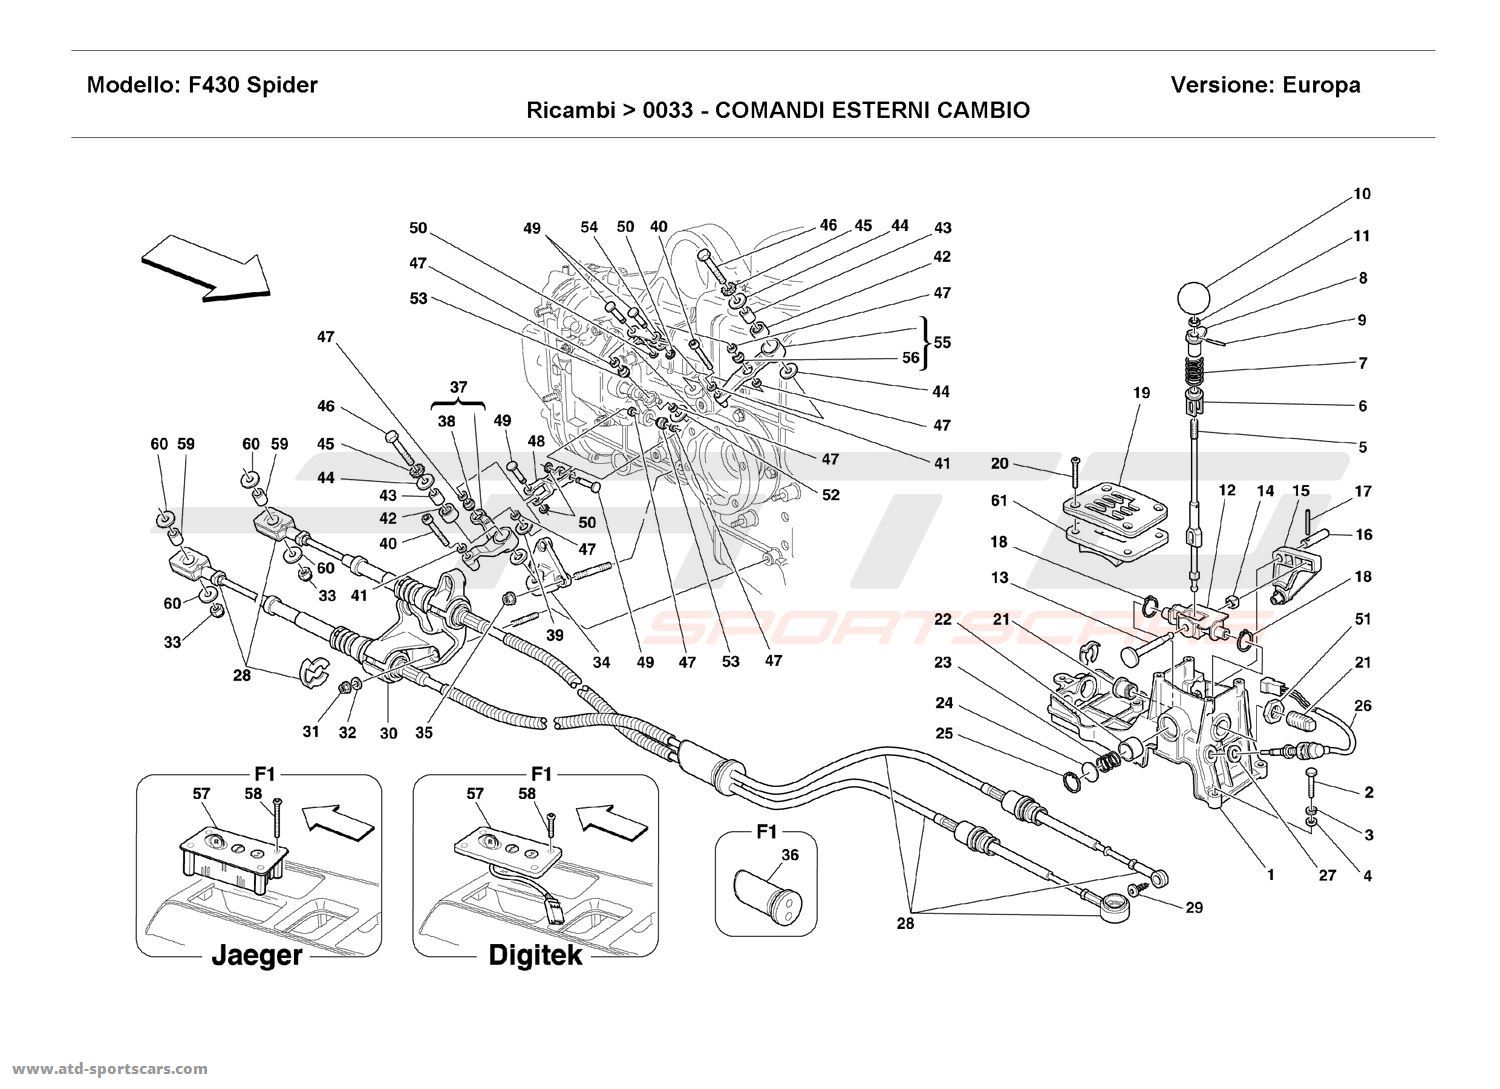 OUTSIDE GEARBOX CONTROLS